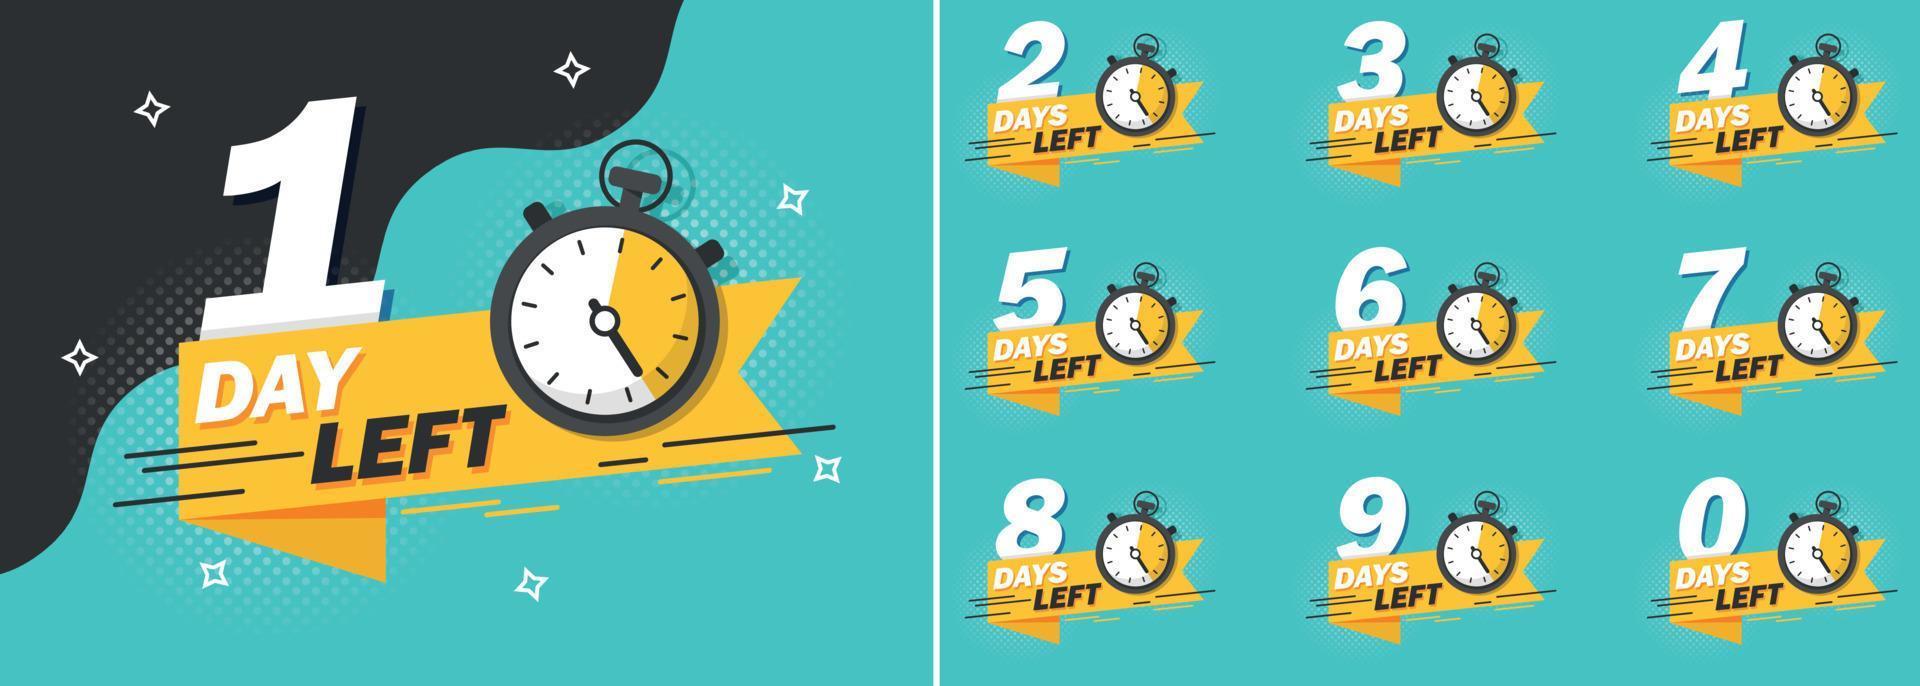 0, 1, 2, 3, 4, 5, 6, 7, 8, 9 days left icon in flat style. Offer countdown date number vector illustration on isolated background. Sale promotion timer sign business concept.